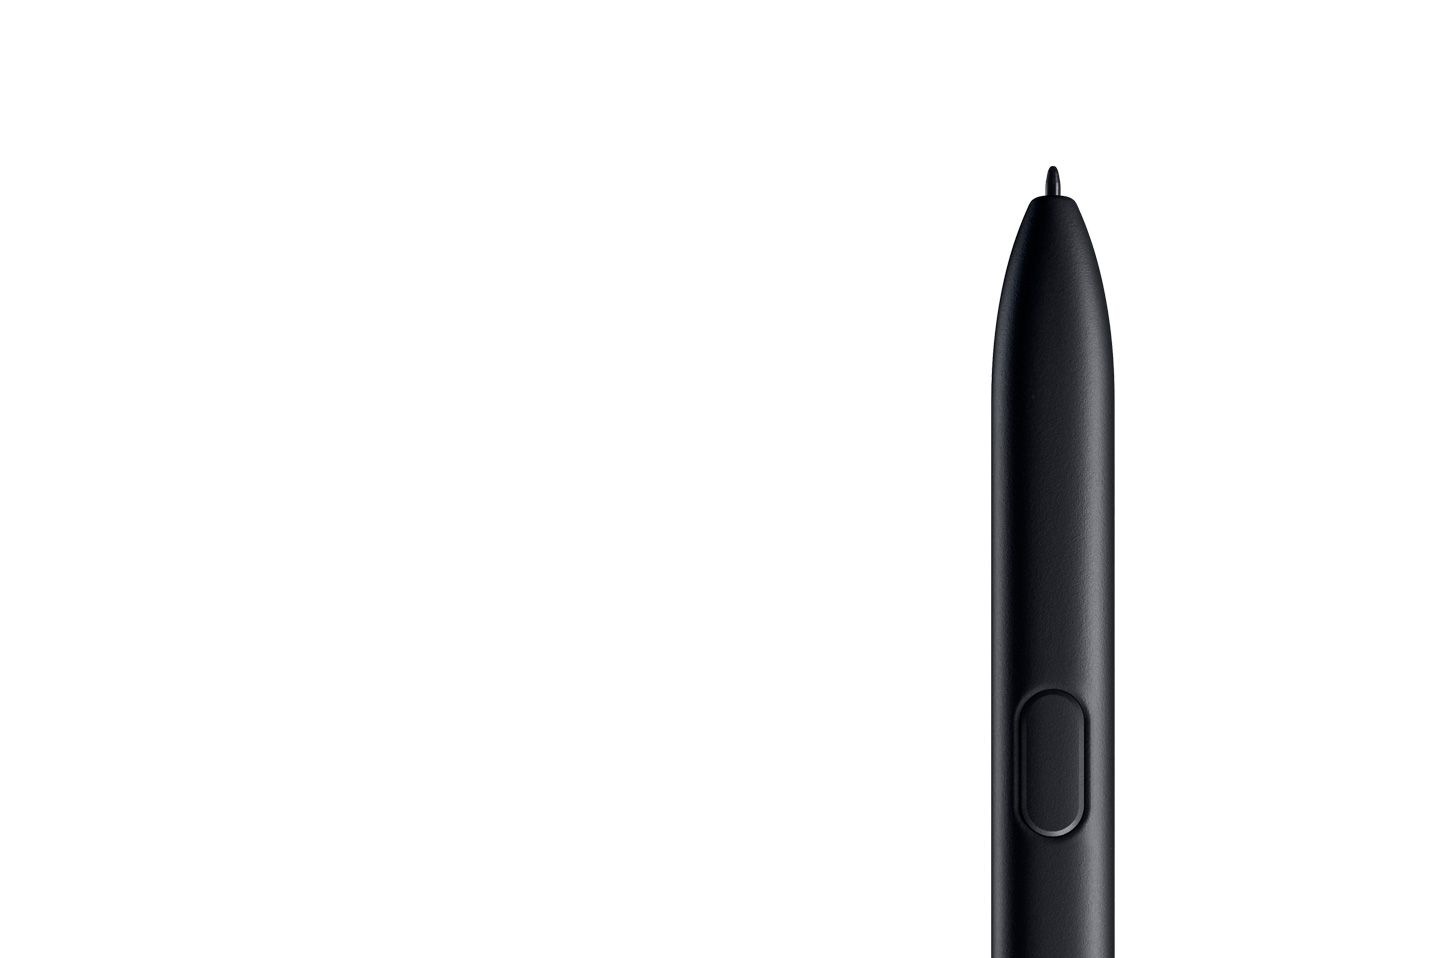 Close up image of the S Pen to be used with Galaxy Tab S3